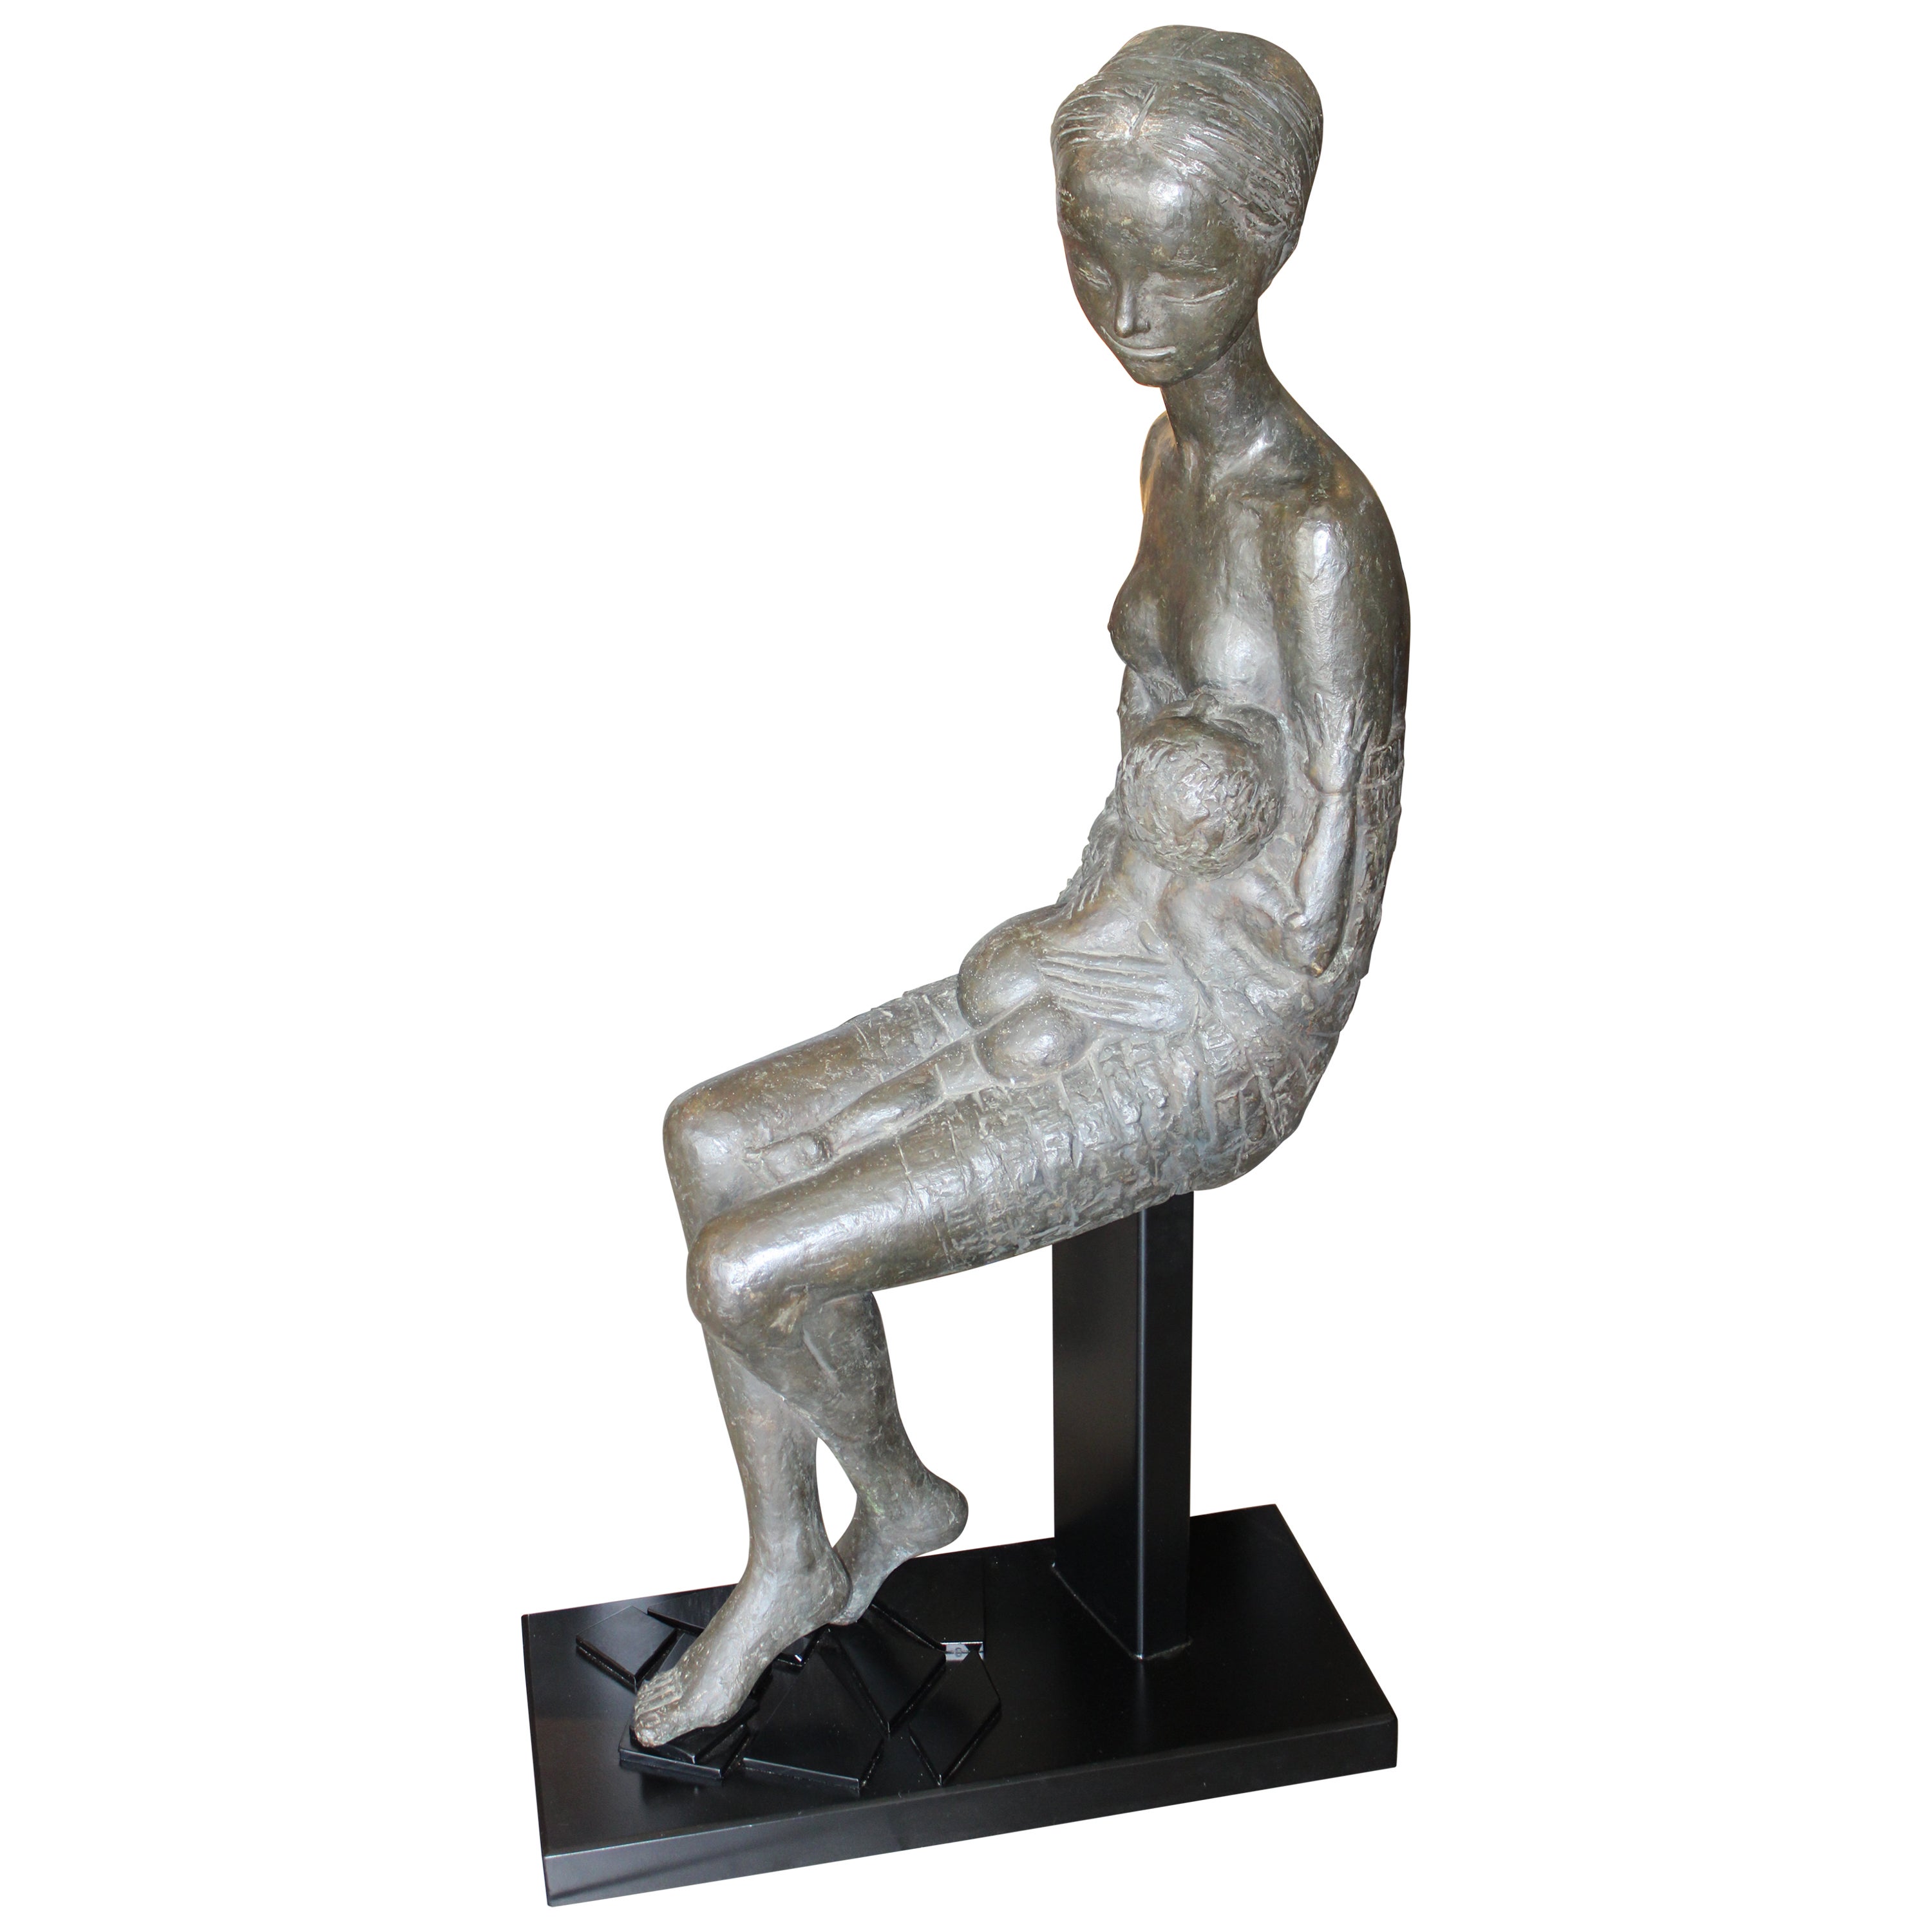 Pino Conte Life-Size Sculpture Called "Maternity", 1/1 For Sale